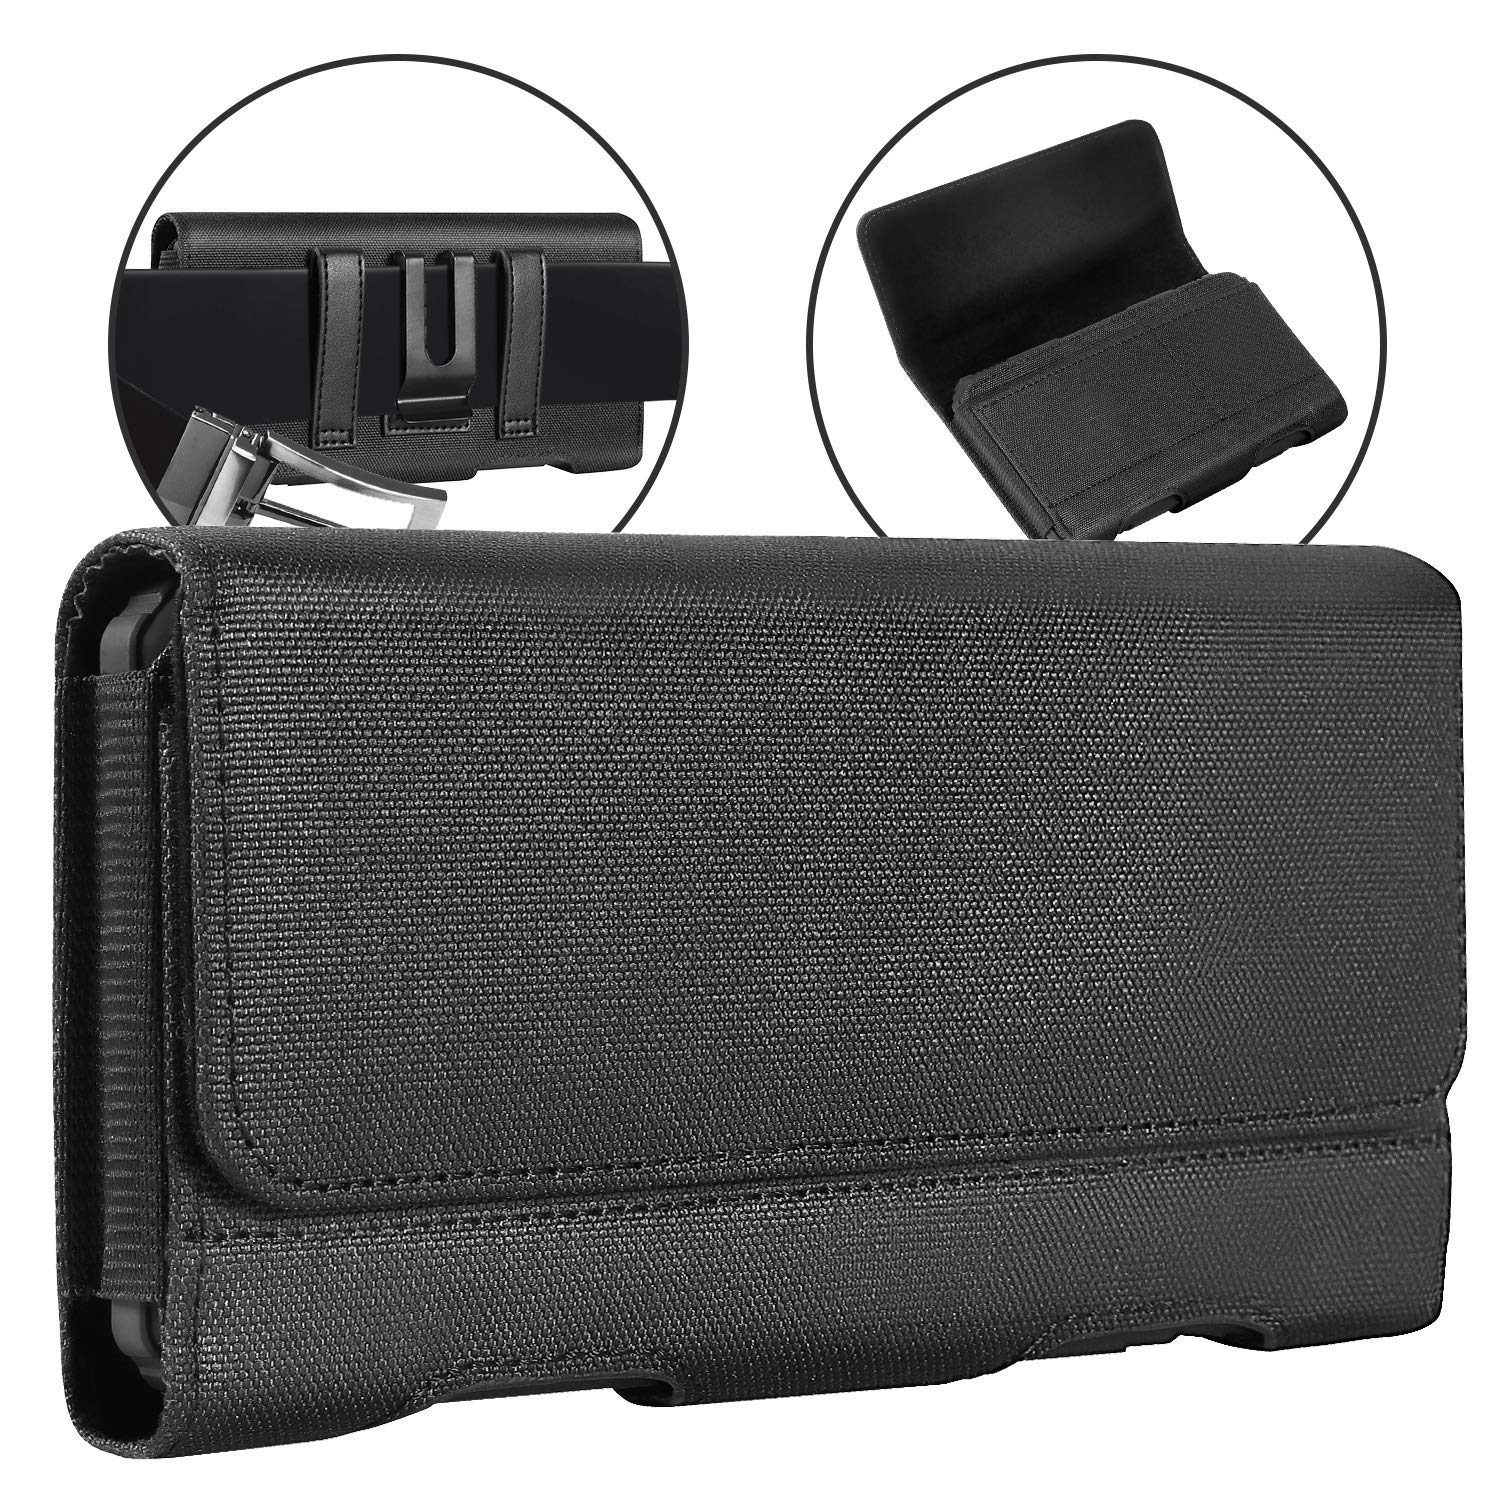 Mopaclle Phone Holster for Samsung galaxy S21 FE, S22 Plus, S23, S21 Plus, S8 S9S10 Plus S20 FE A11 A12 A32 A42 A02, A03 core,A0